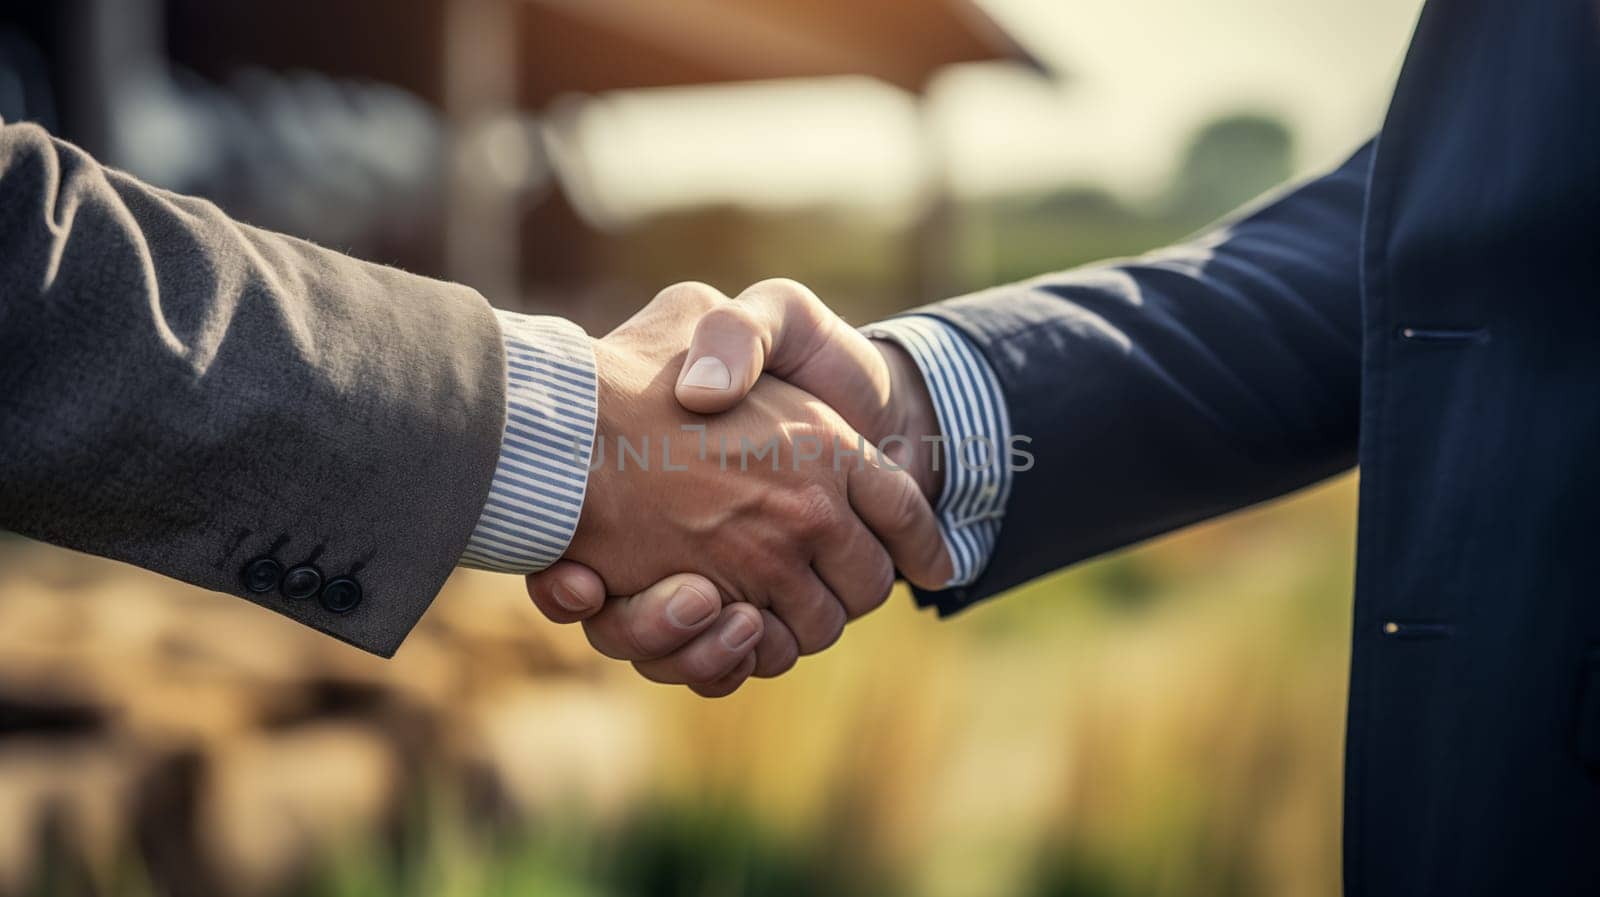 Handshake of two men in suit against the background of a farm.